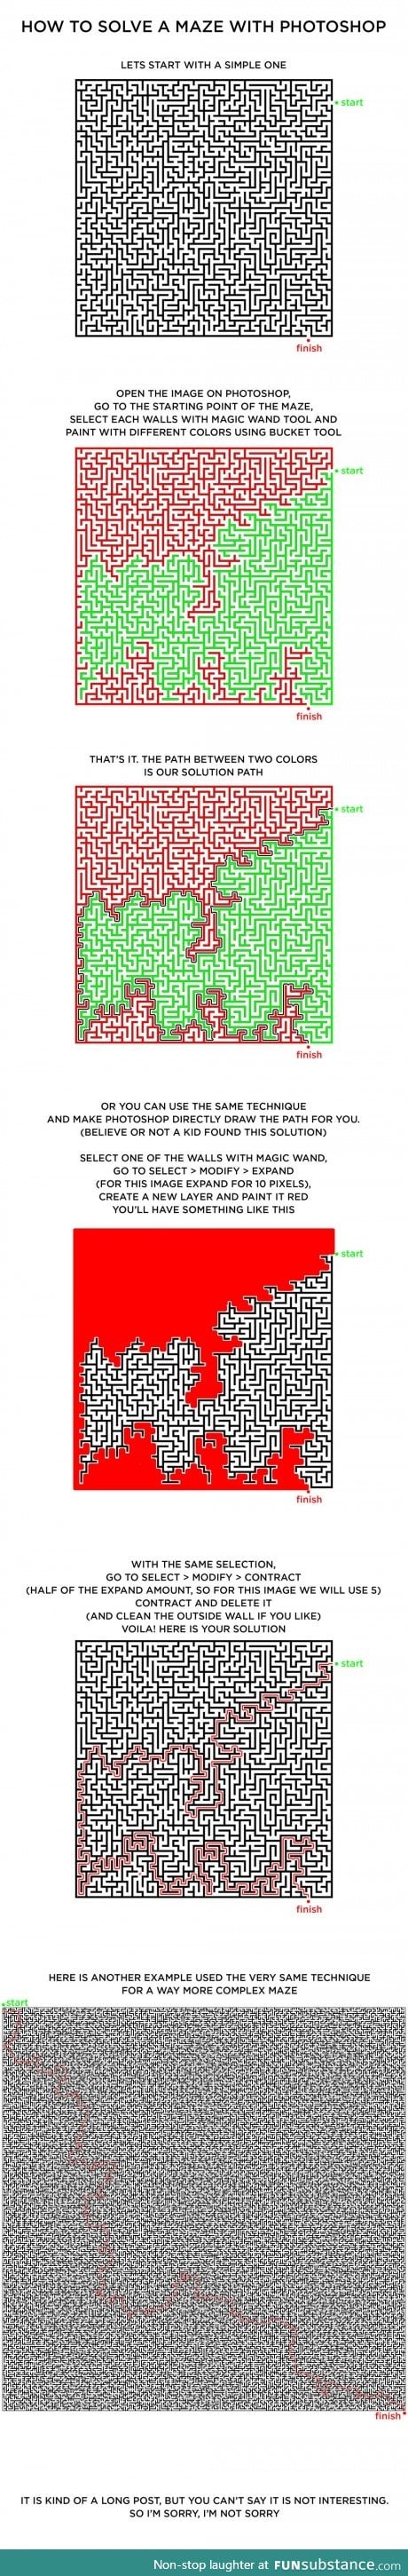 for all your "lost in a digital maze" needs